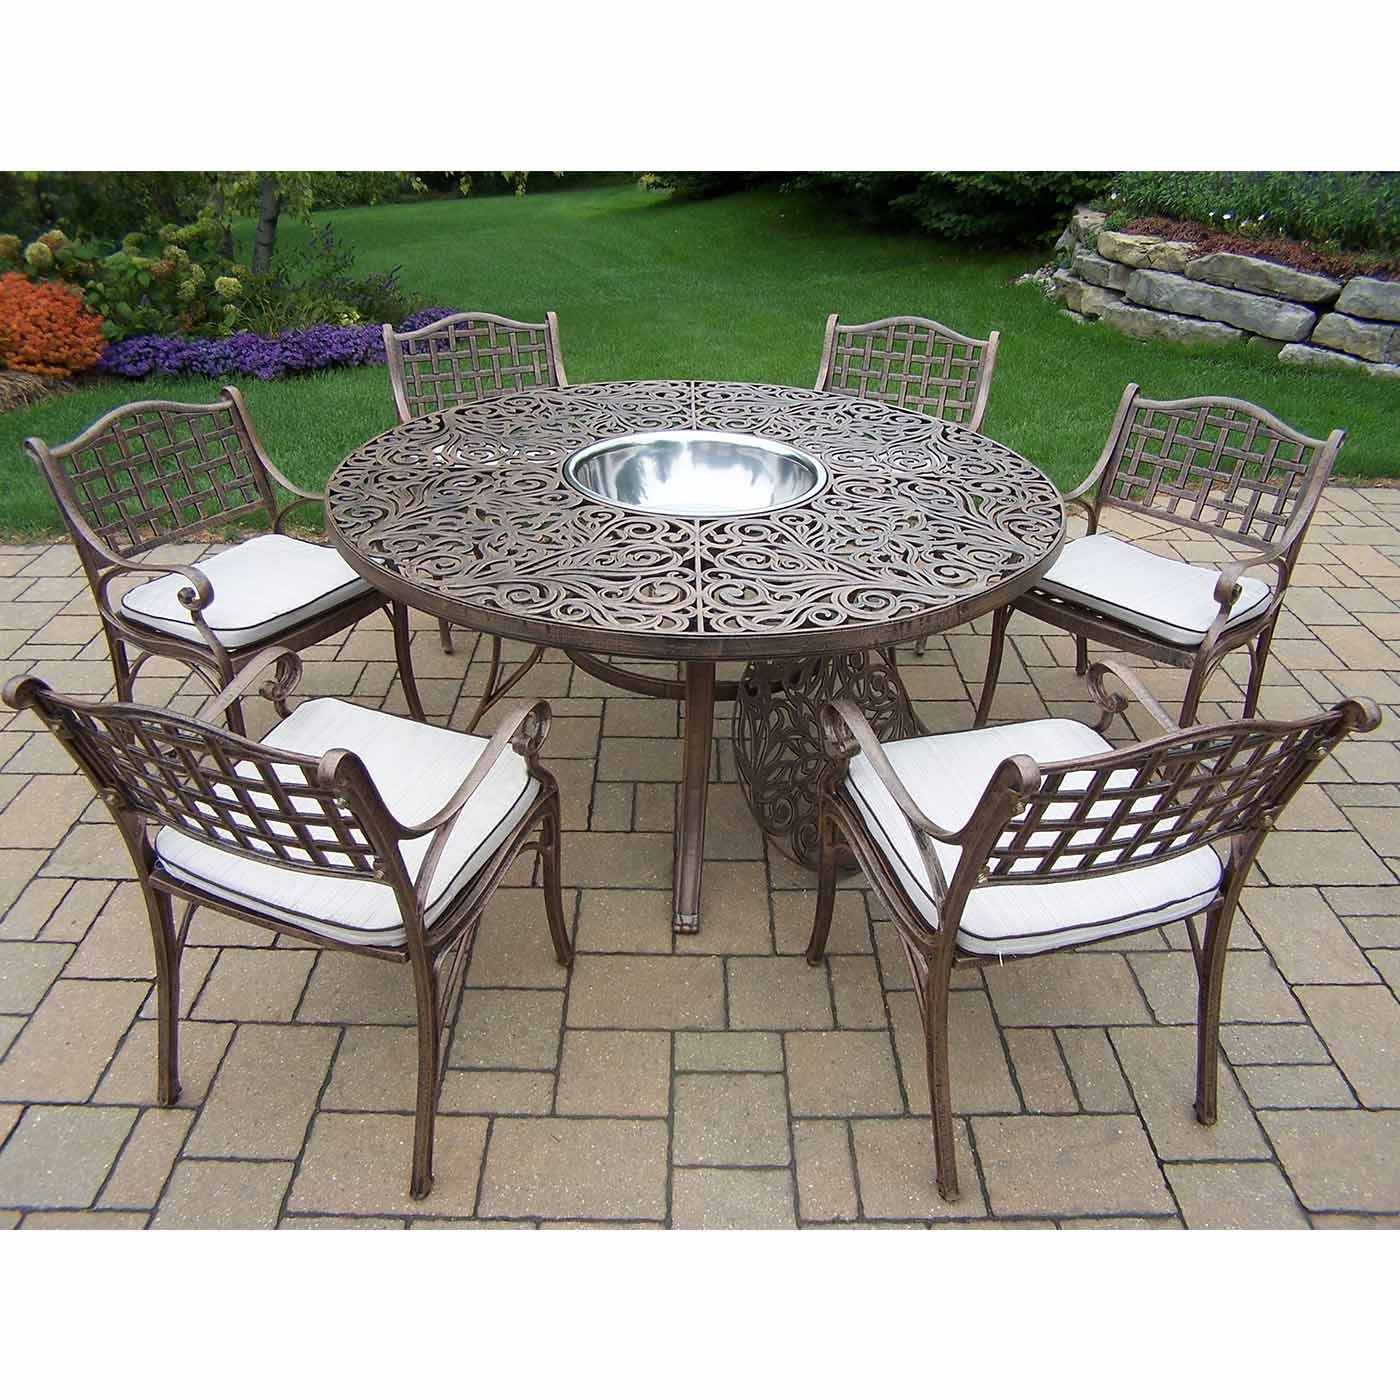 Oakland living mississippi 8pc round patio dining set with